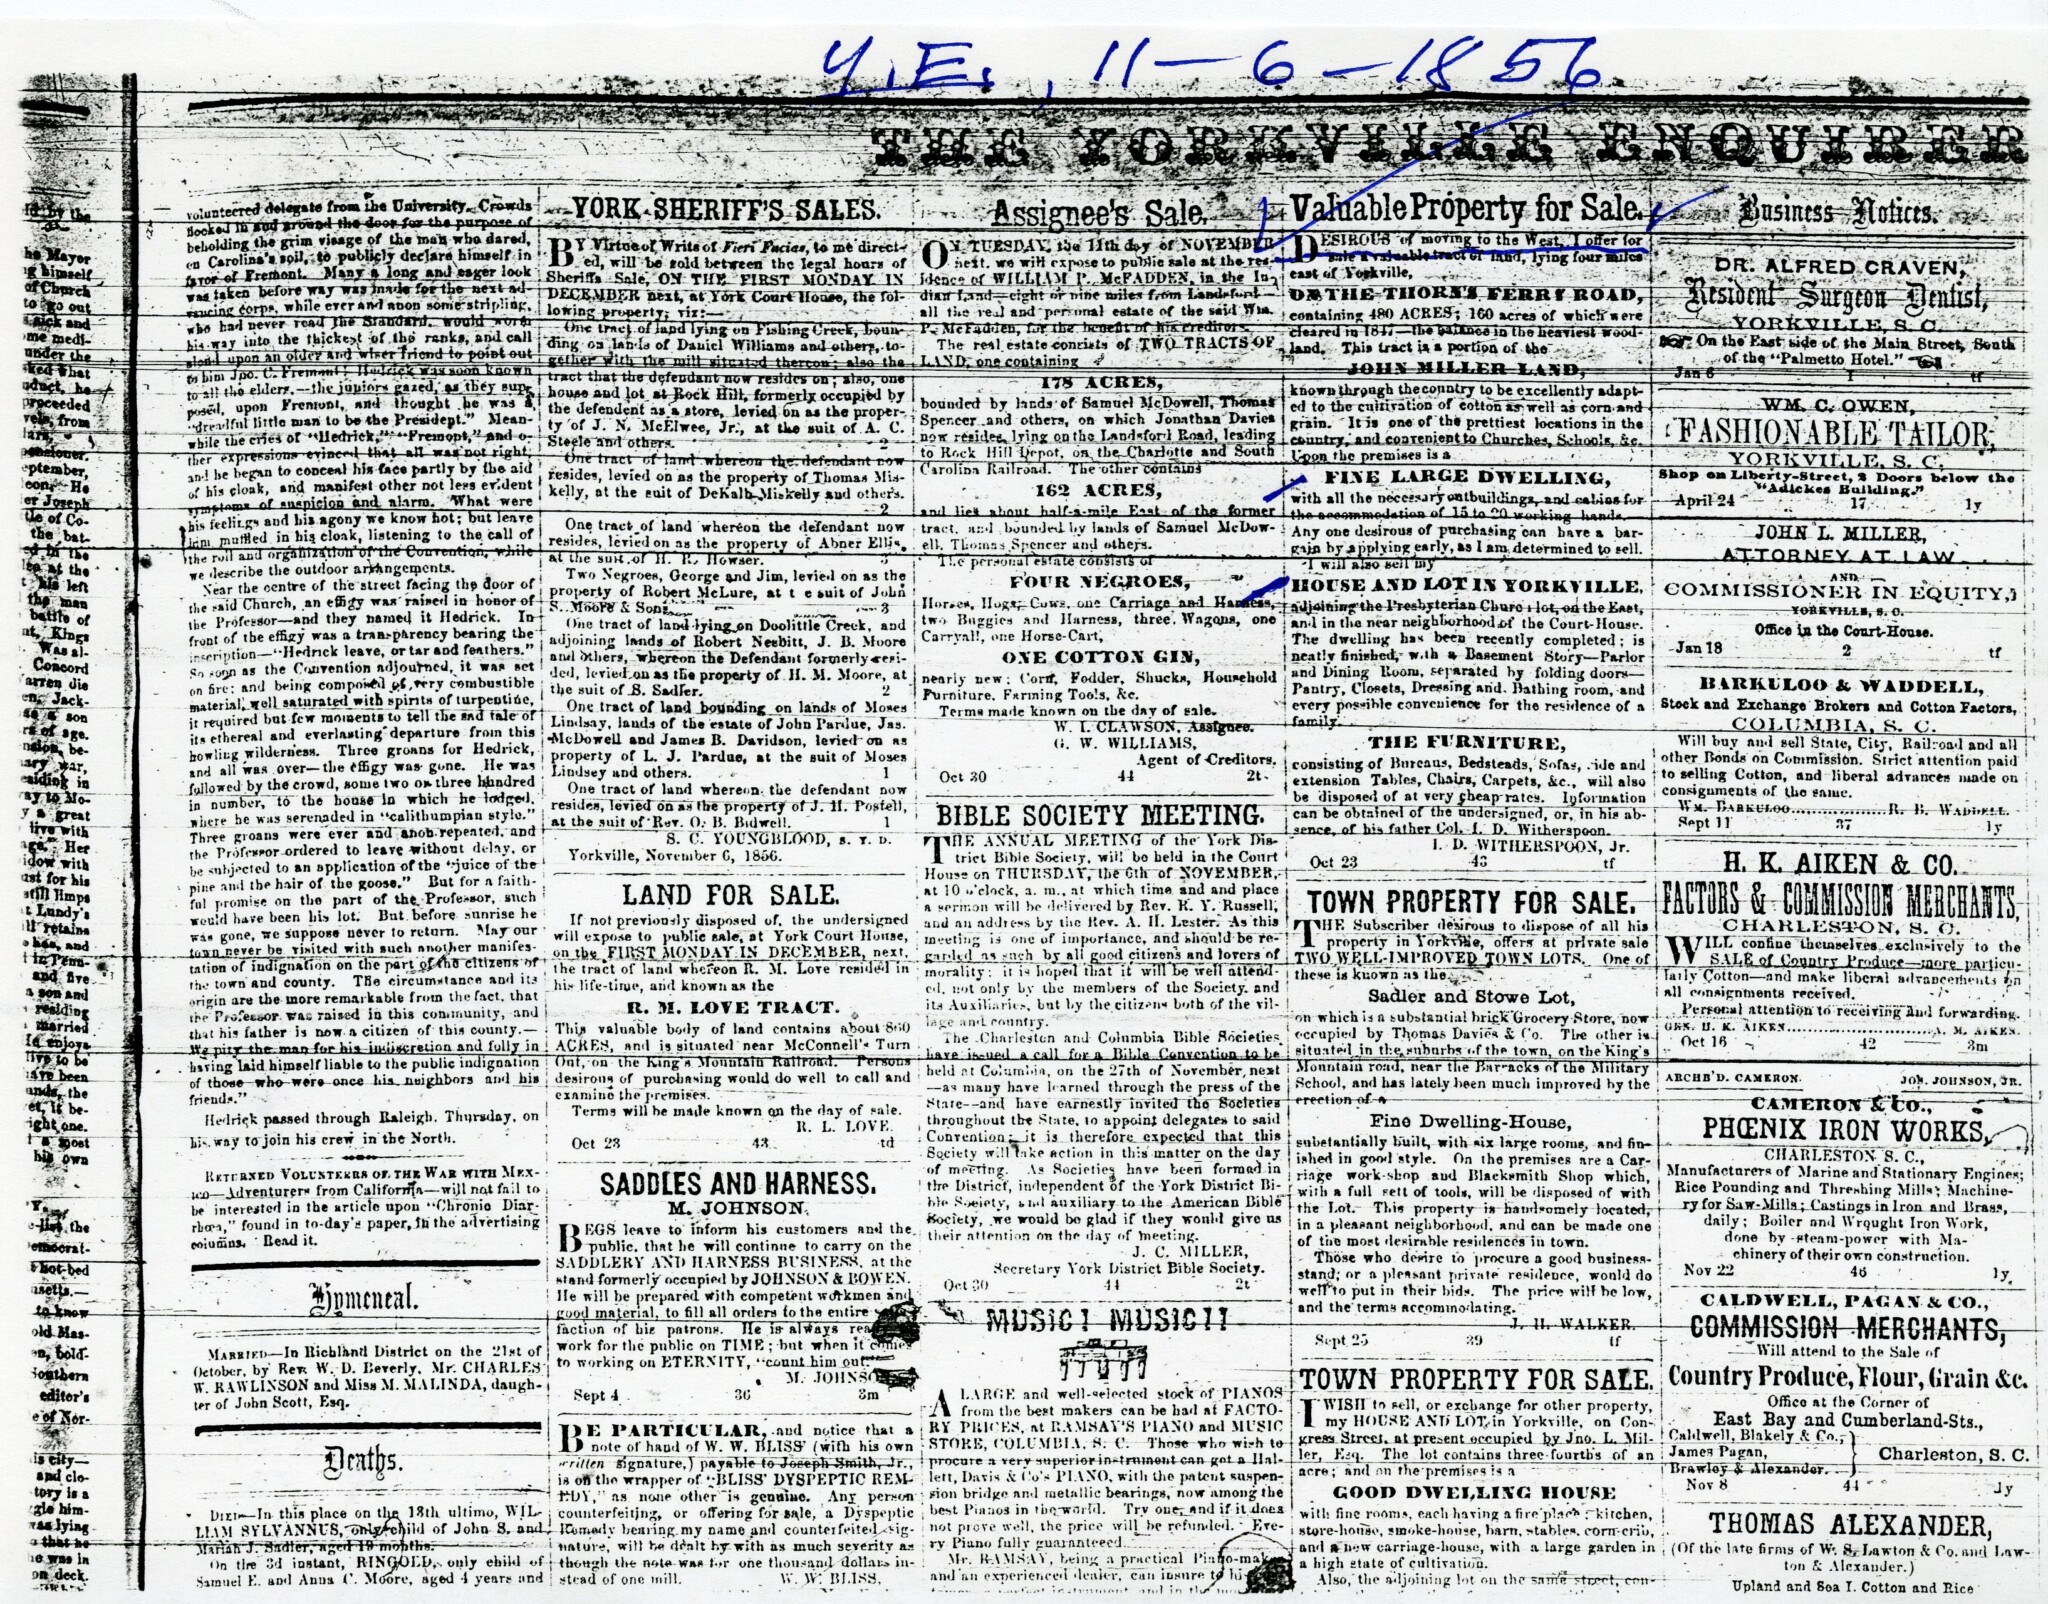 IRONWORKS AD IN THE YORKVILLE ENQUIRER - 1856